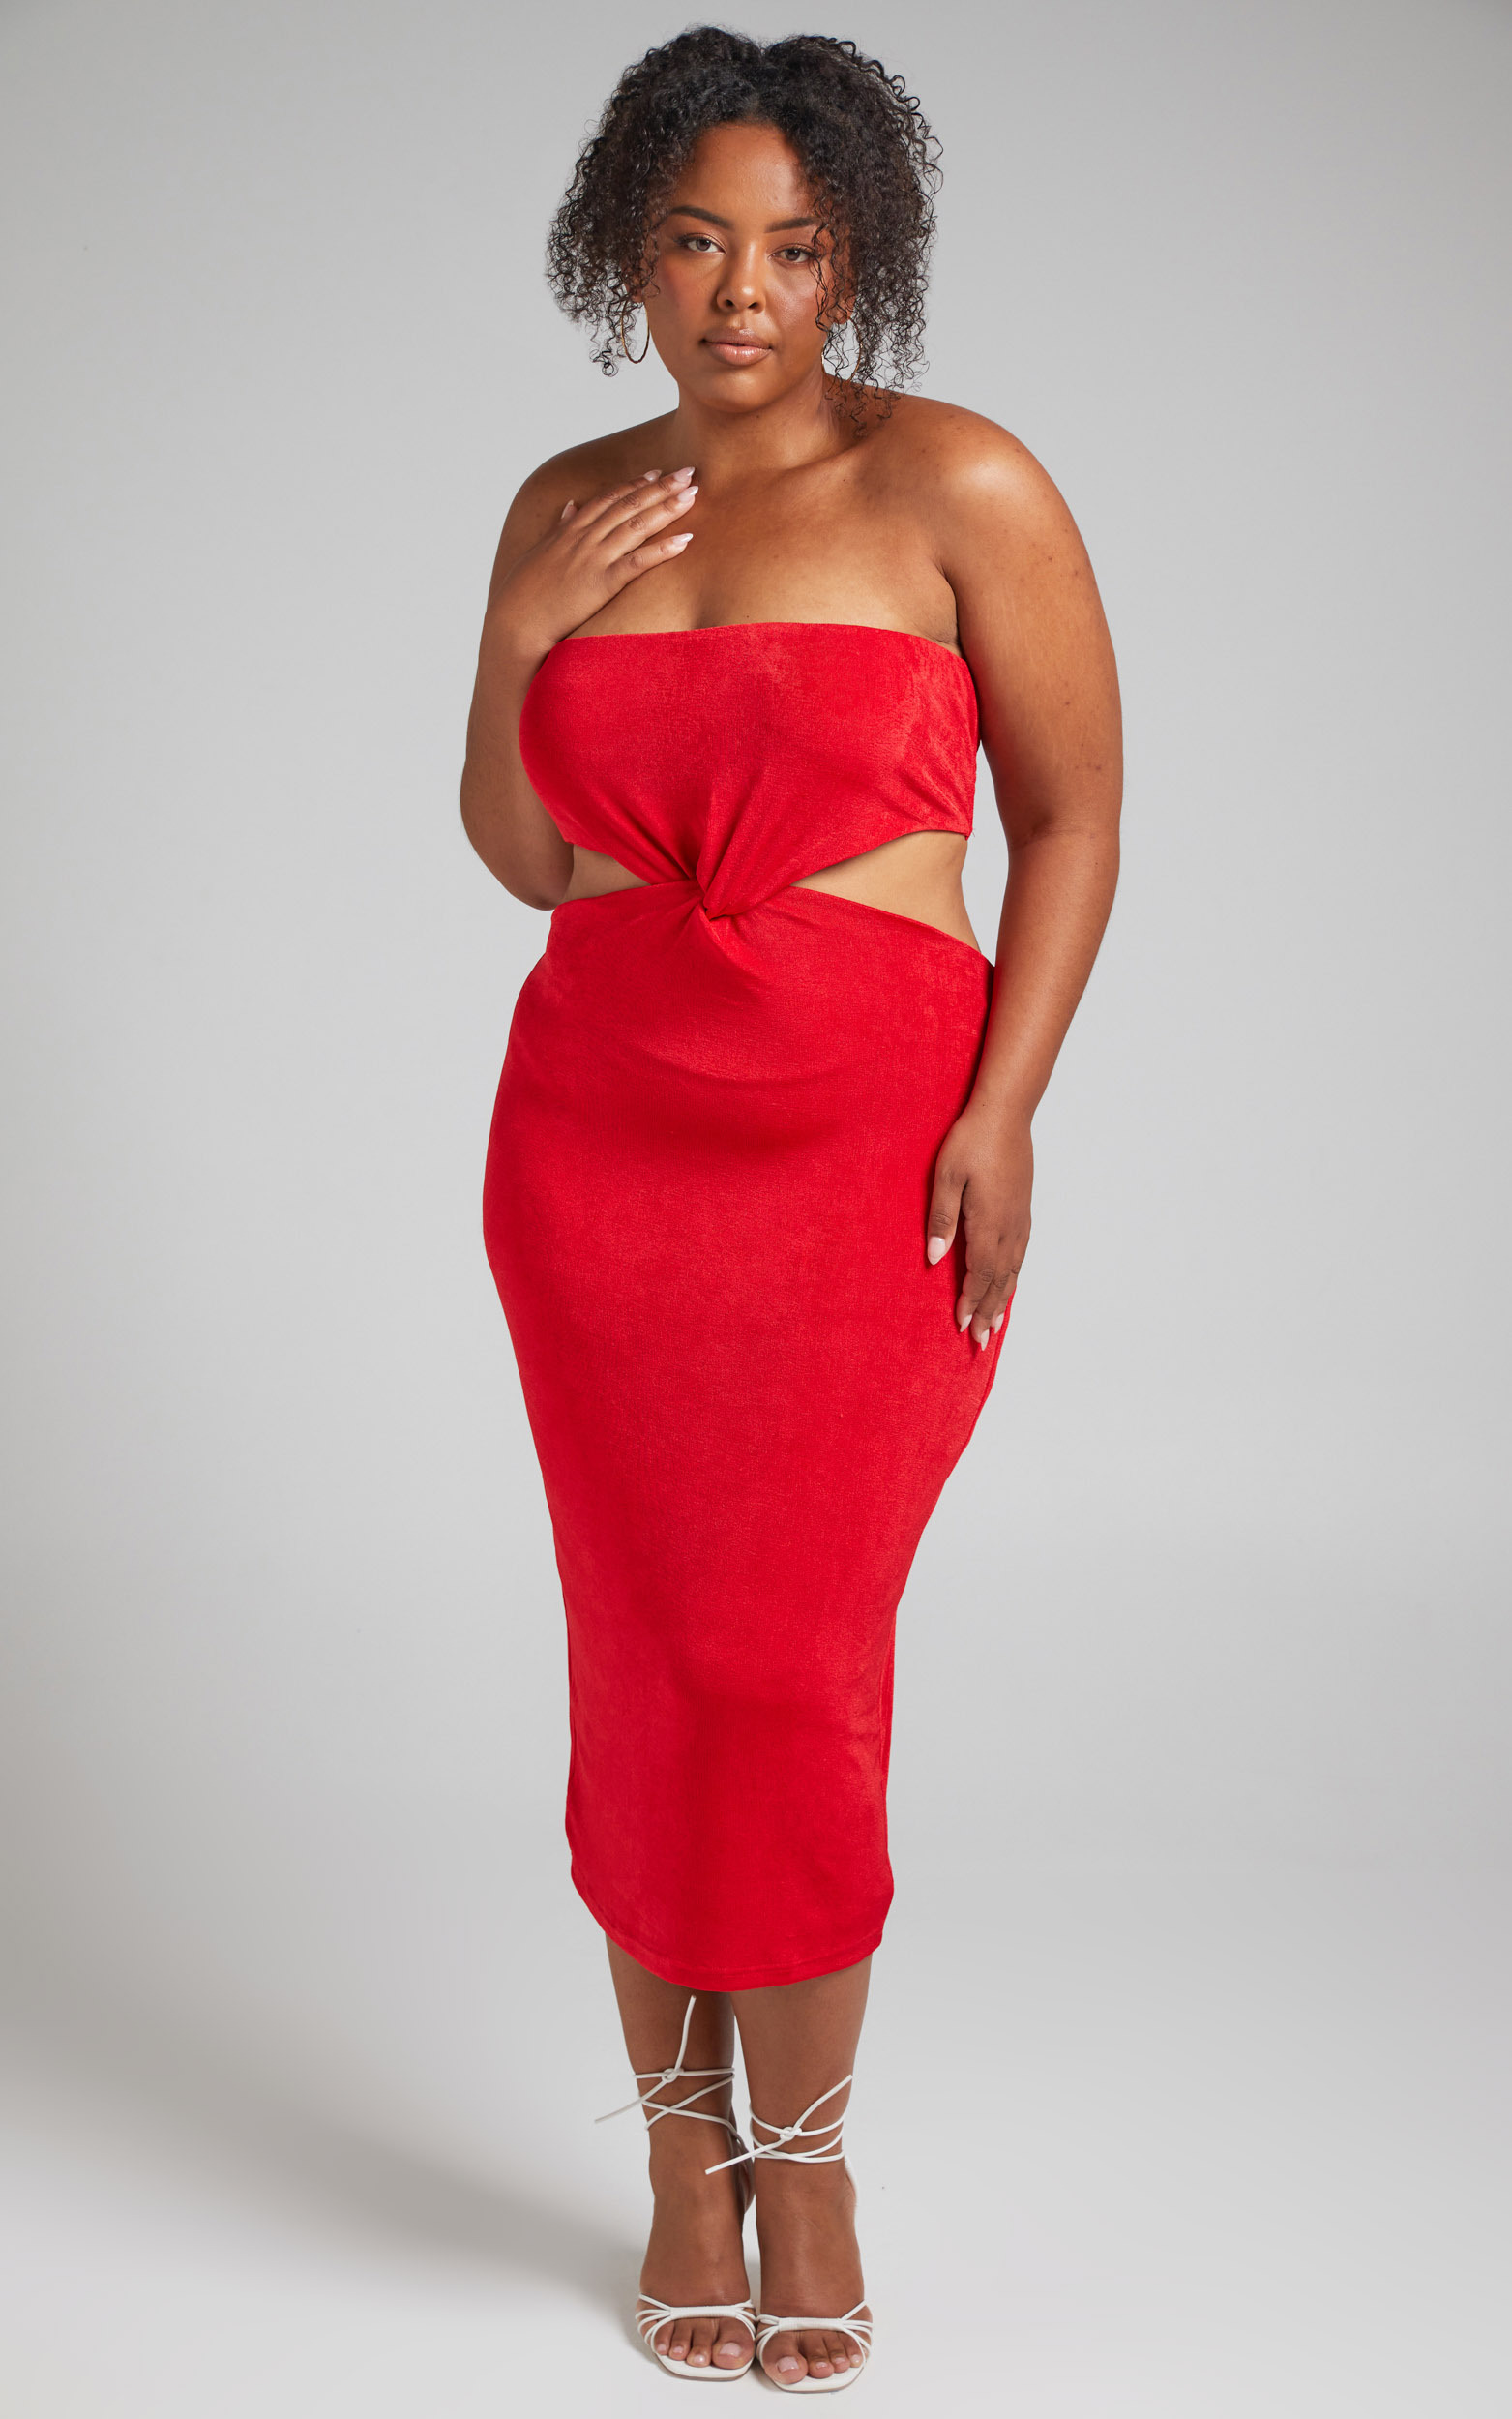 Candence Twist Front Strapless Dress in Red - 04, RED1, hi-res image number null